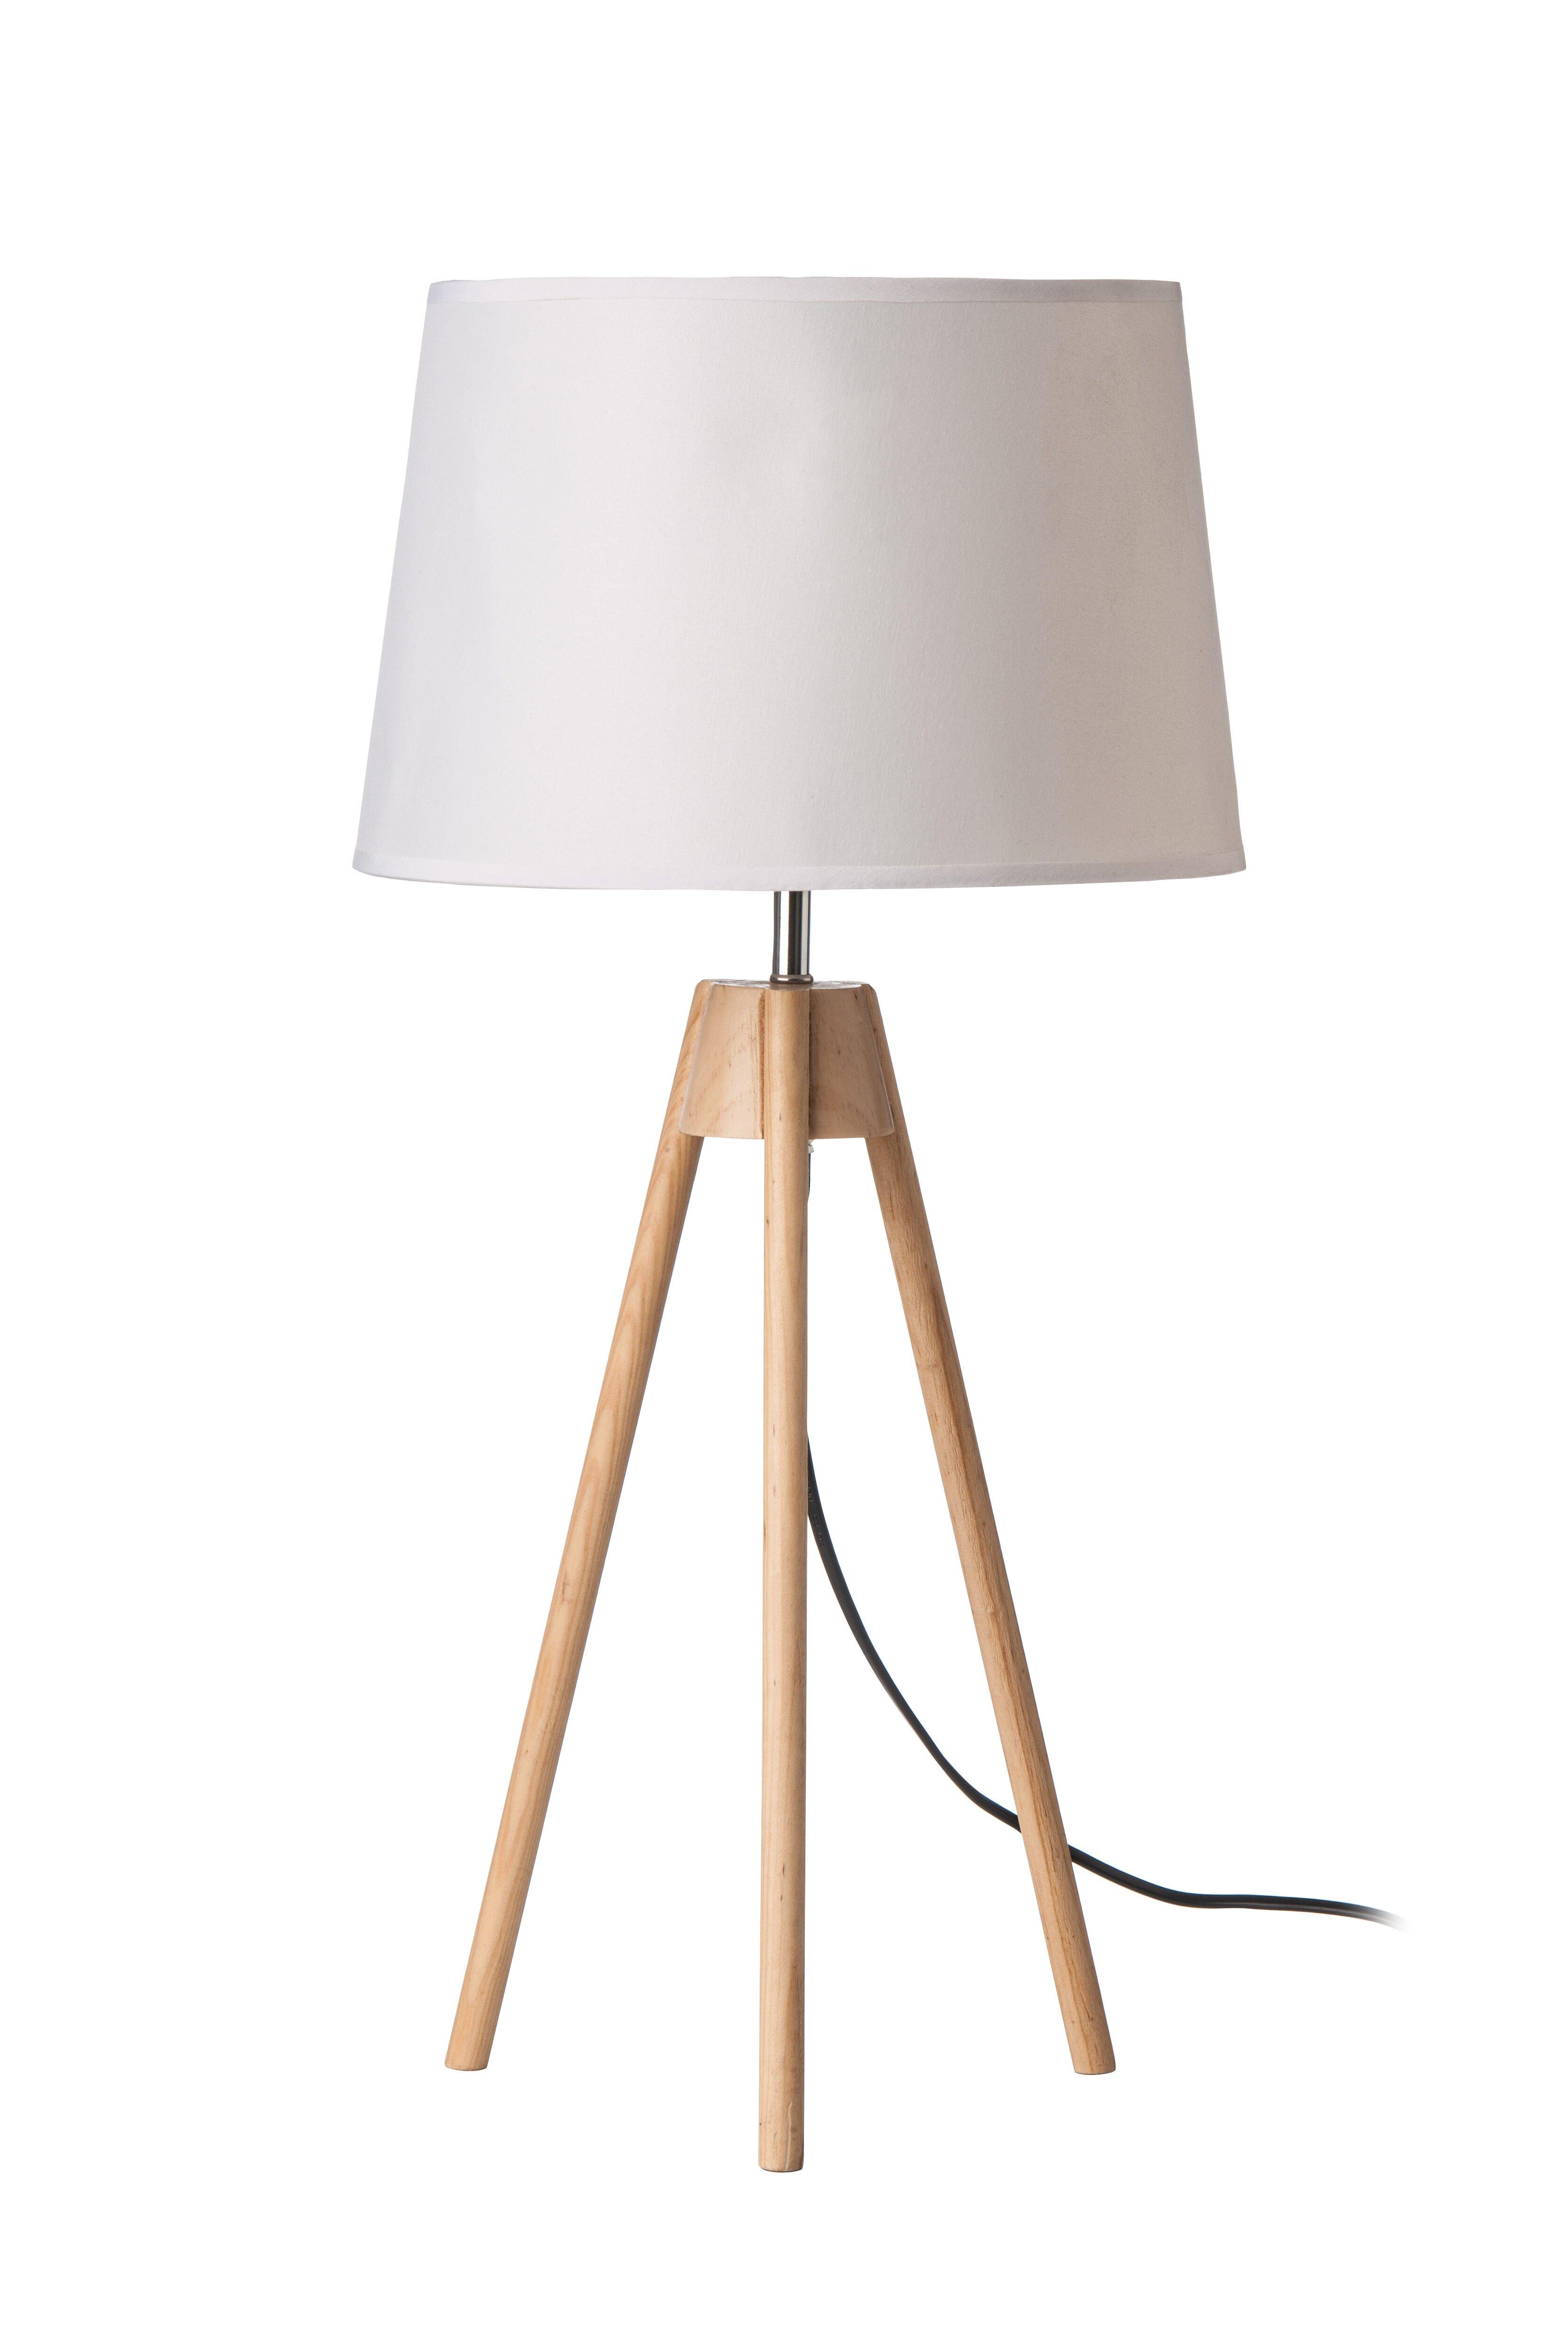 Interiors by Premier White Shade Tripod Table Lamp with UK Plug